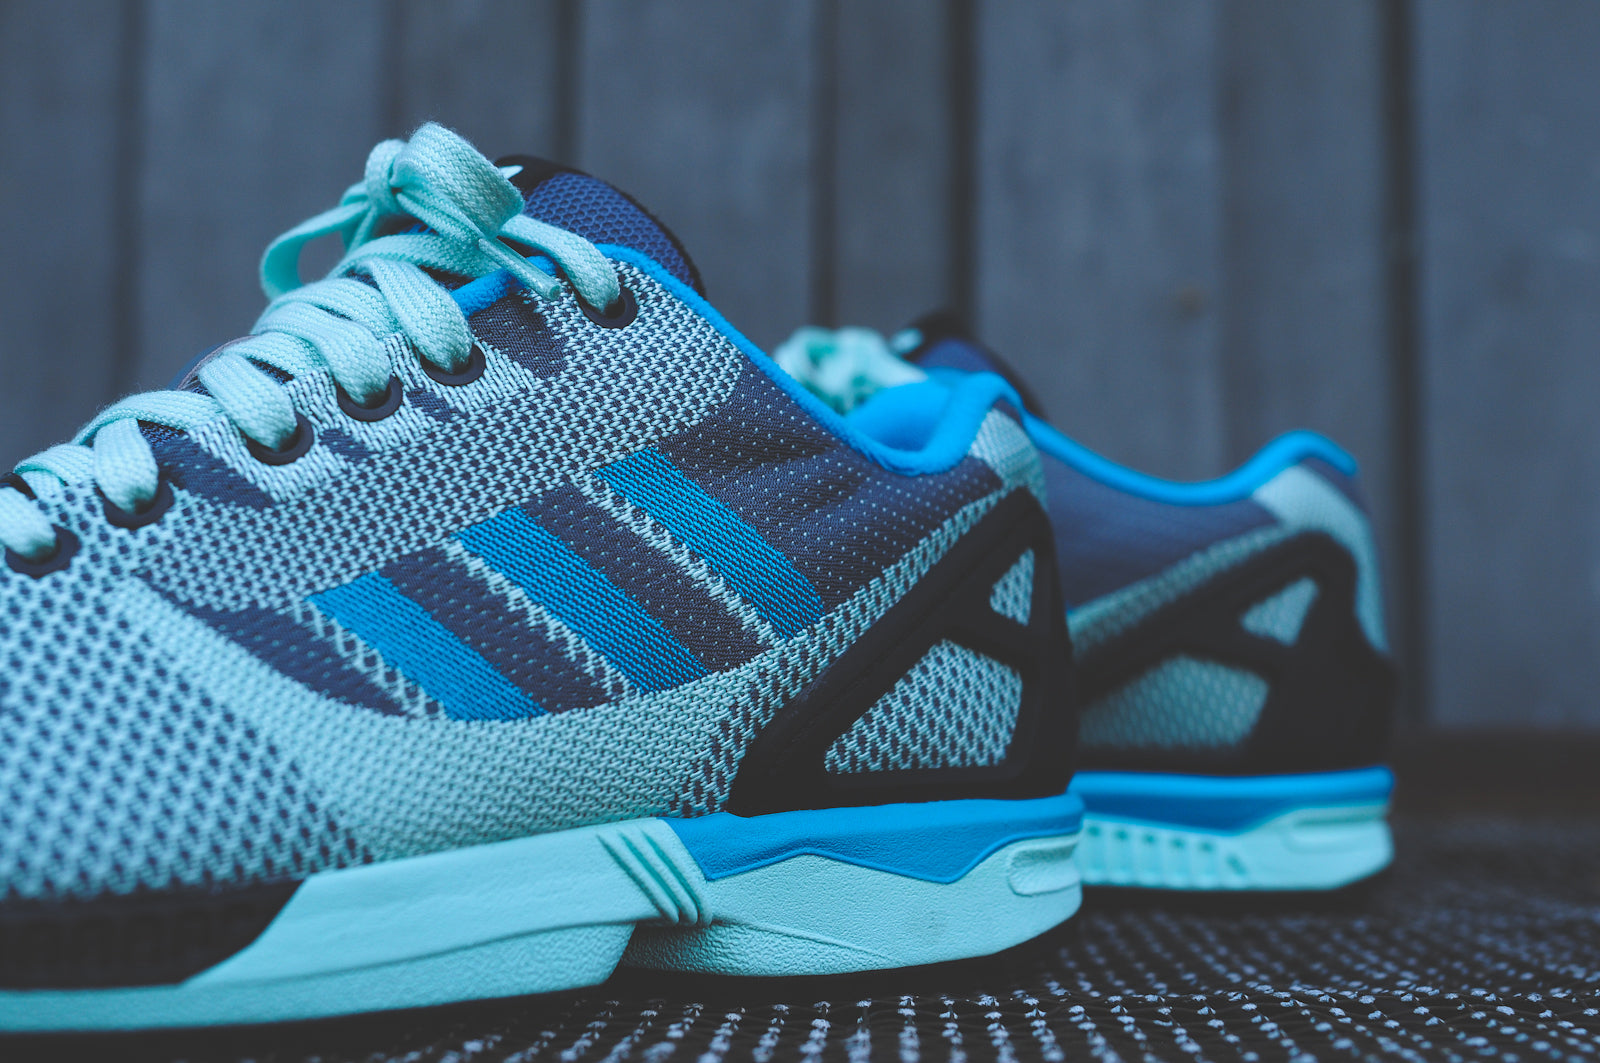 ORIGINALS ZX FLUX "8000 WEAVE" - TEAL/GREY @ KITH NYC – Kith